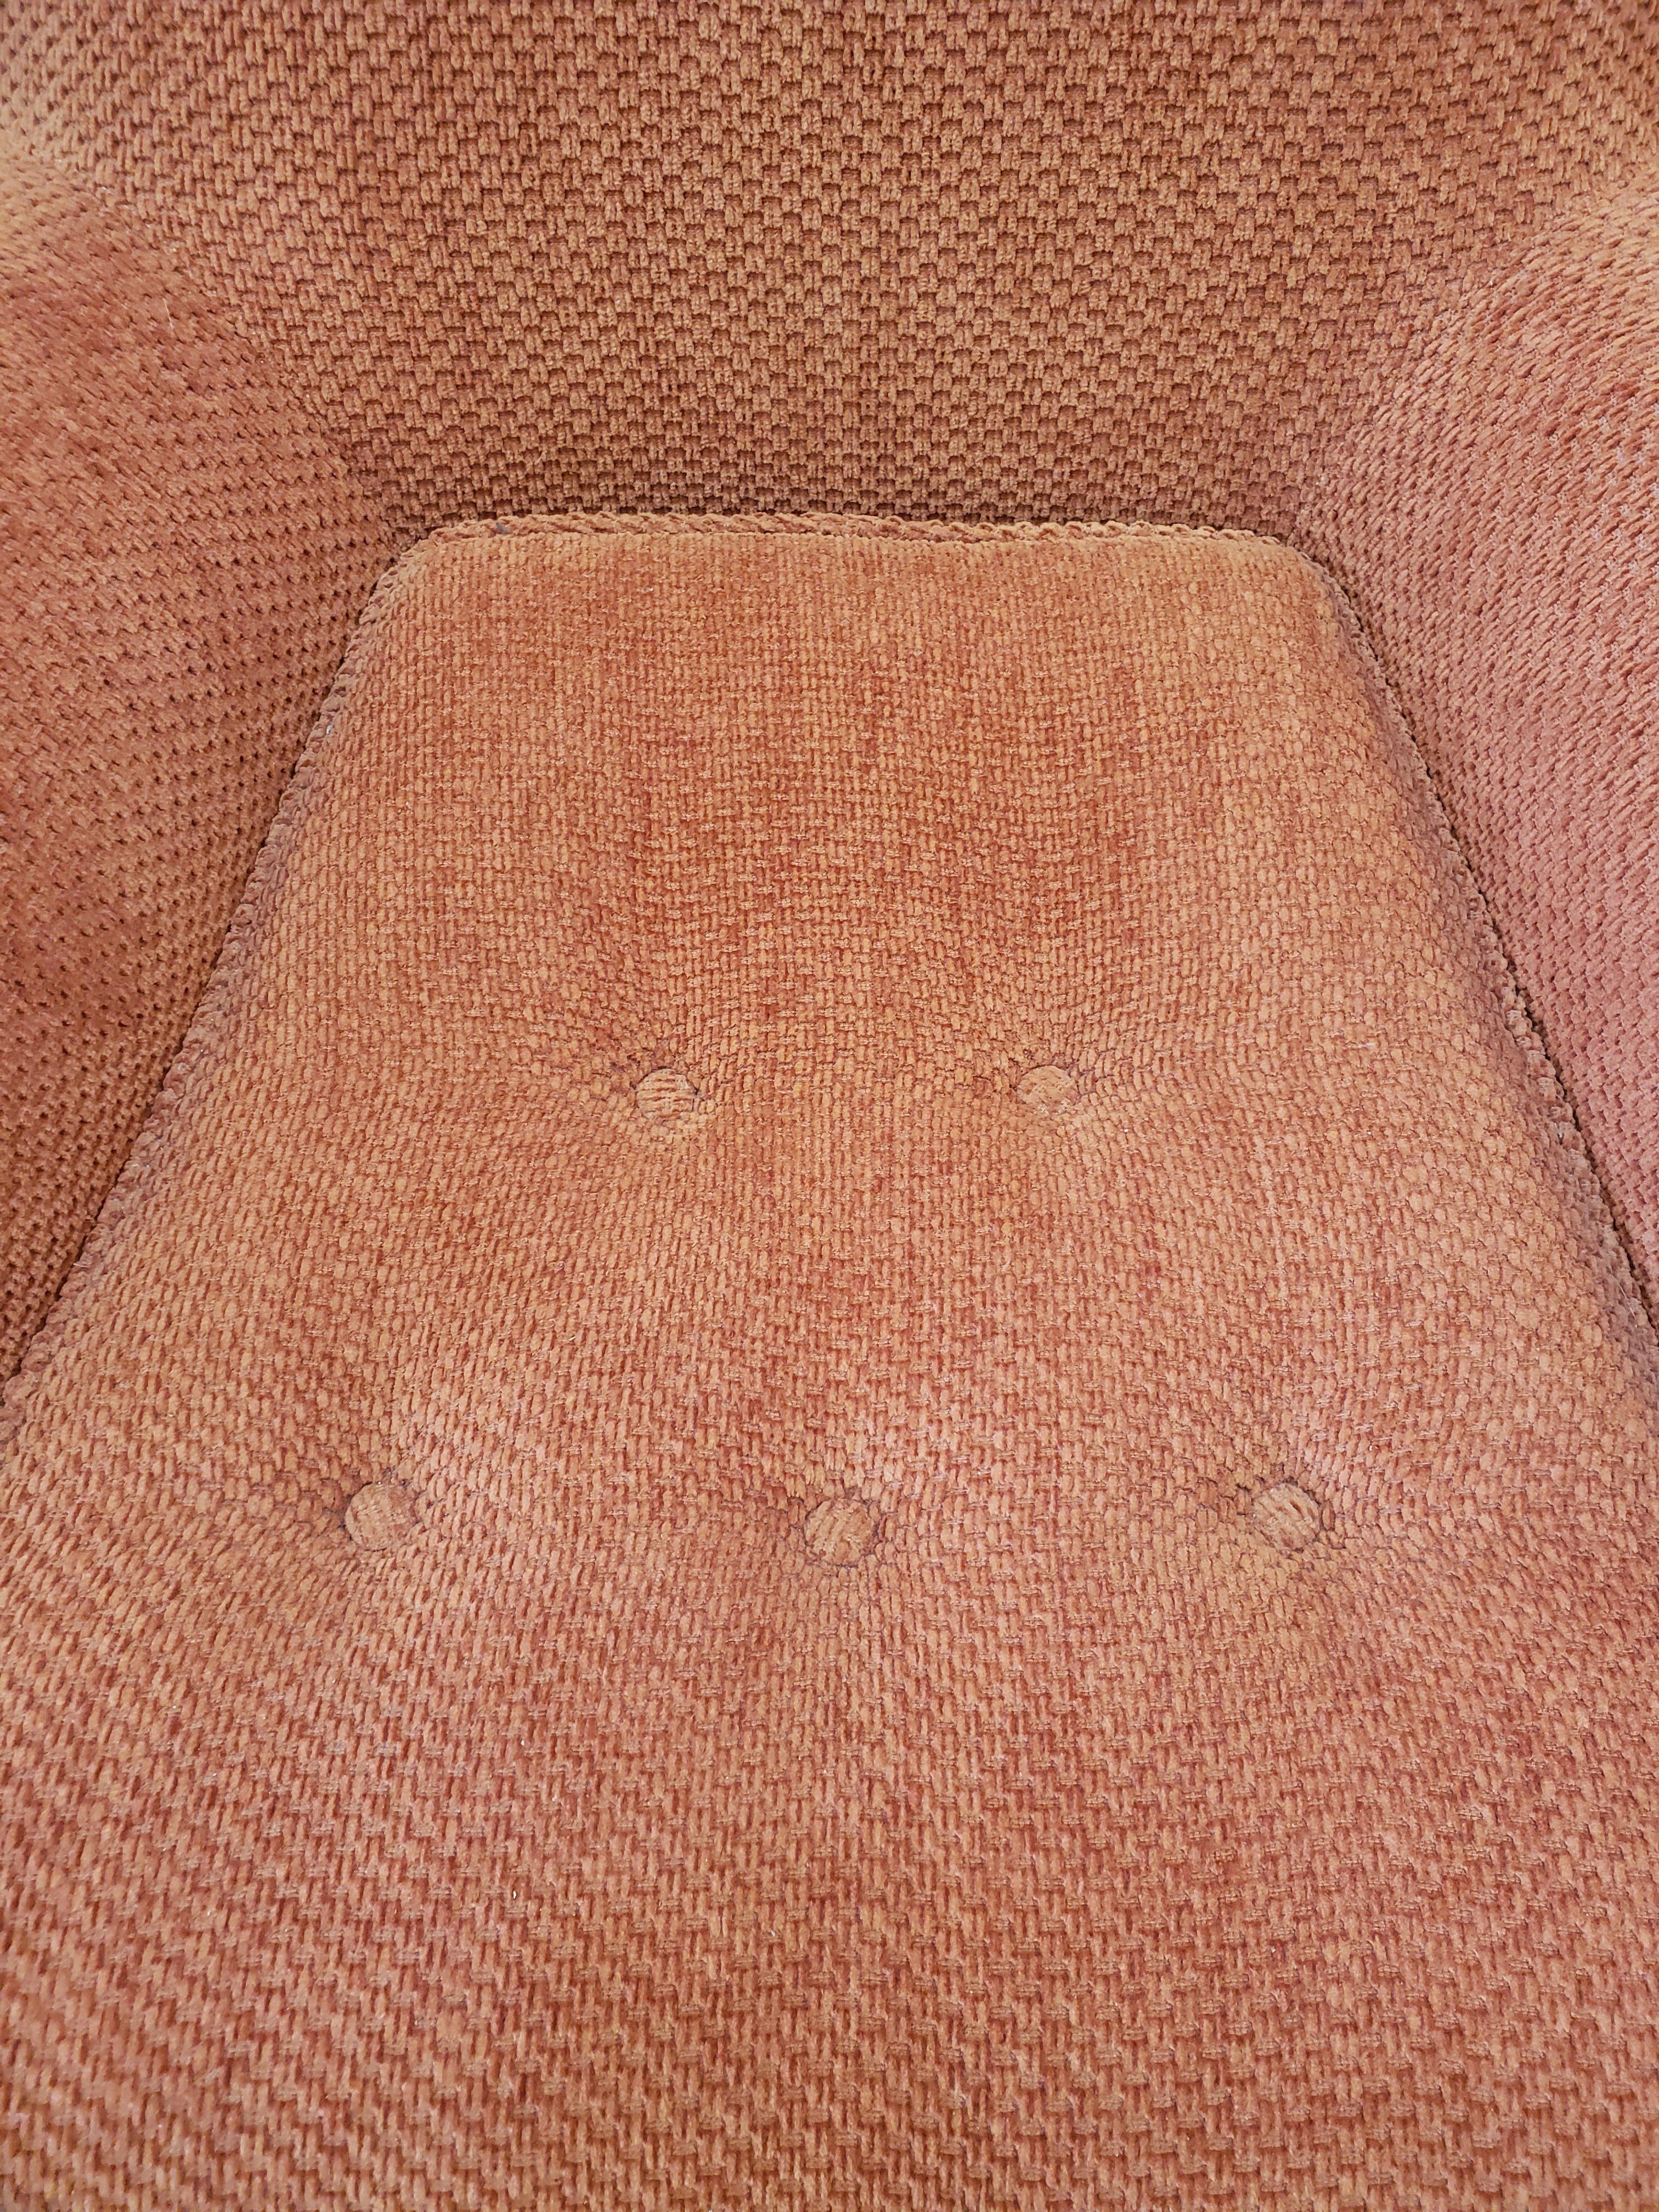 Pair of 19th Century English Club Chairs with Orange Chenille Upholstery For Sale 10